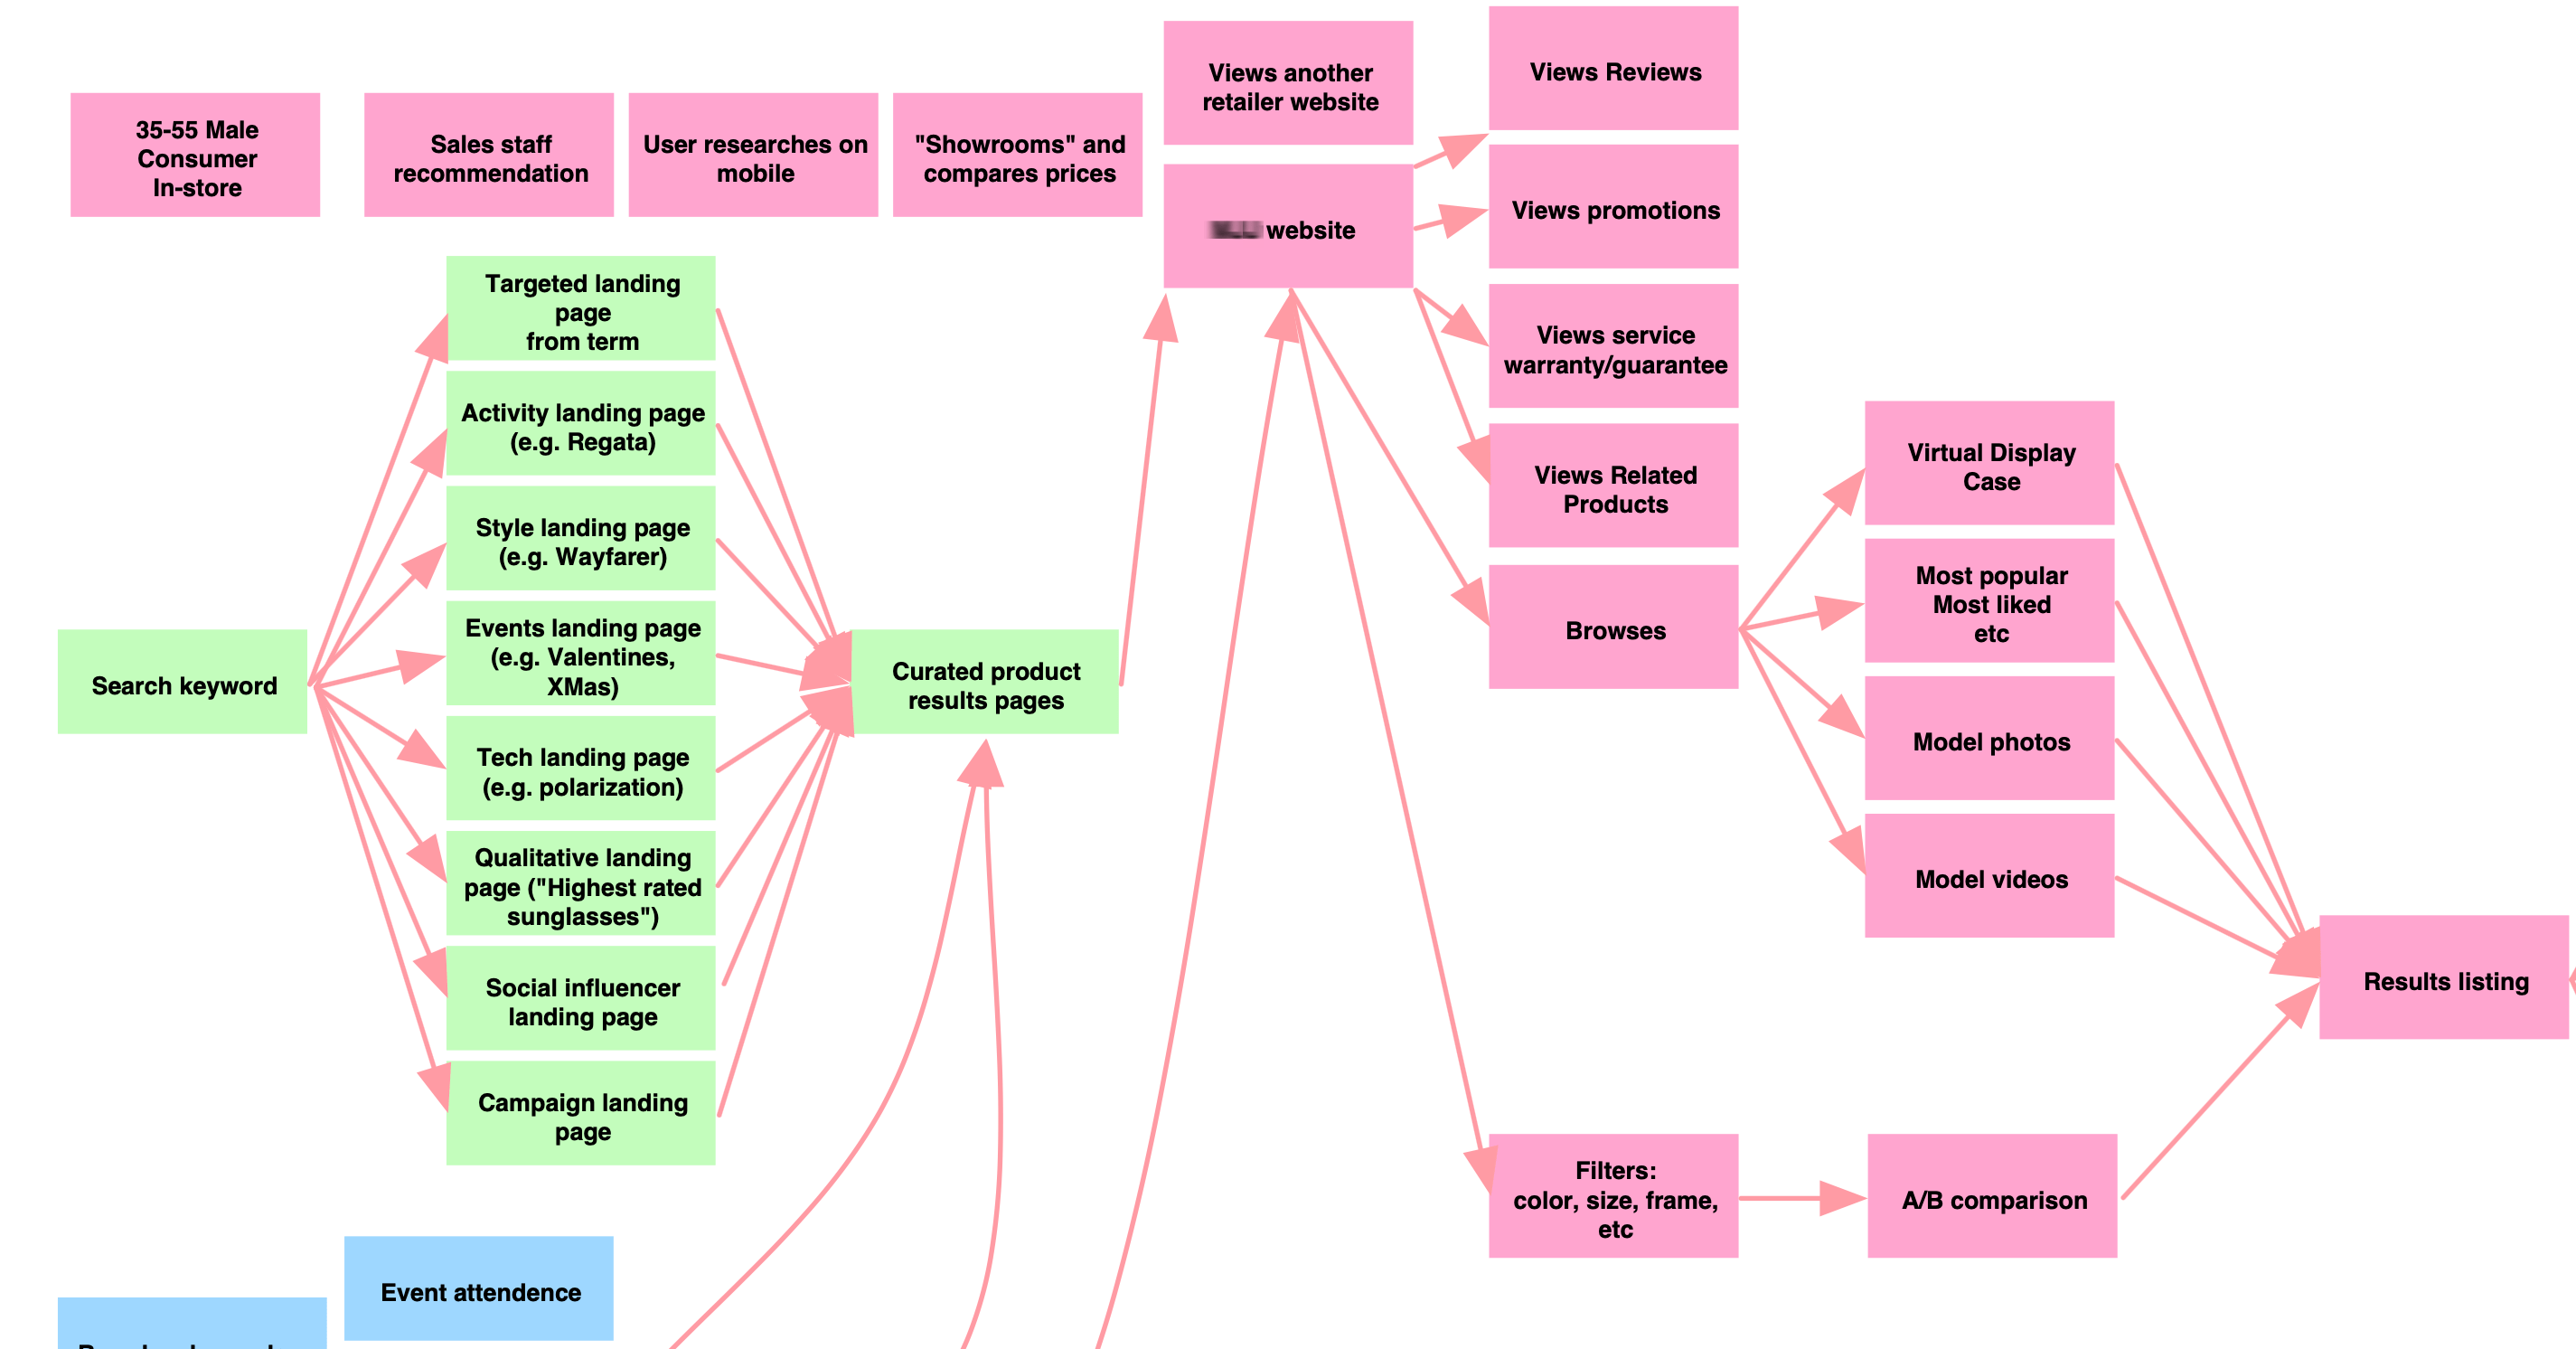 Cropped image of partial user journeys